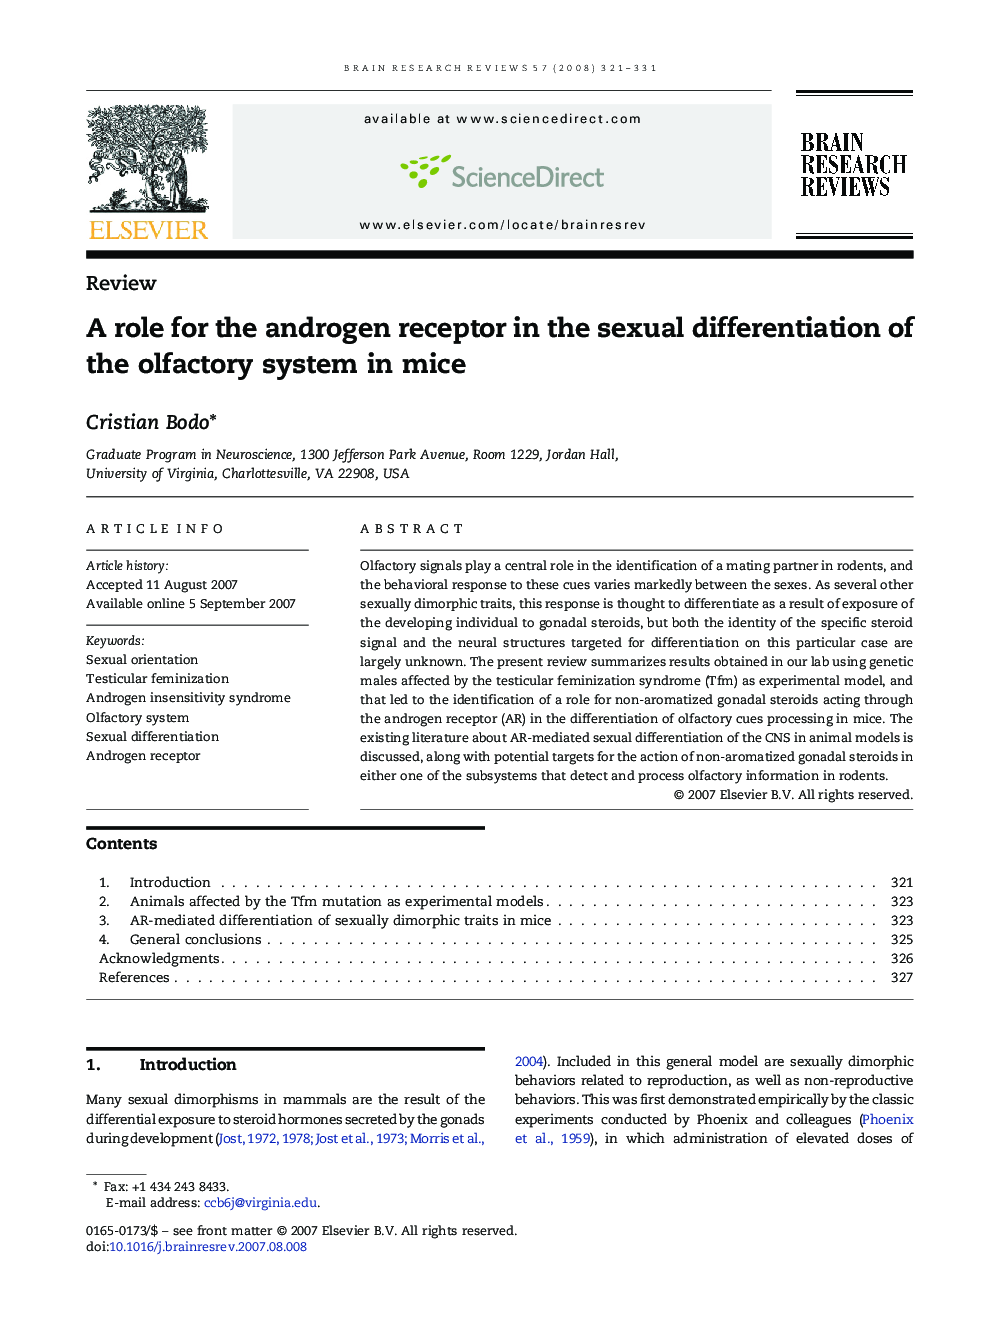 A role for the androgen receptor in the sexual differentiation of the olfactory system in mice